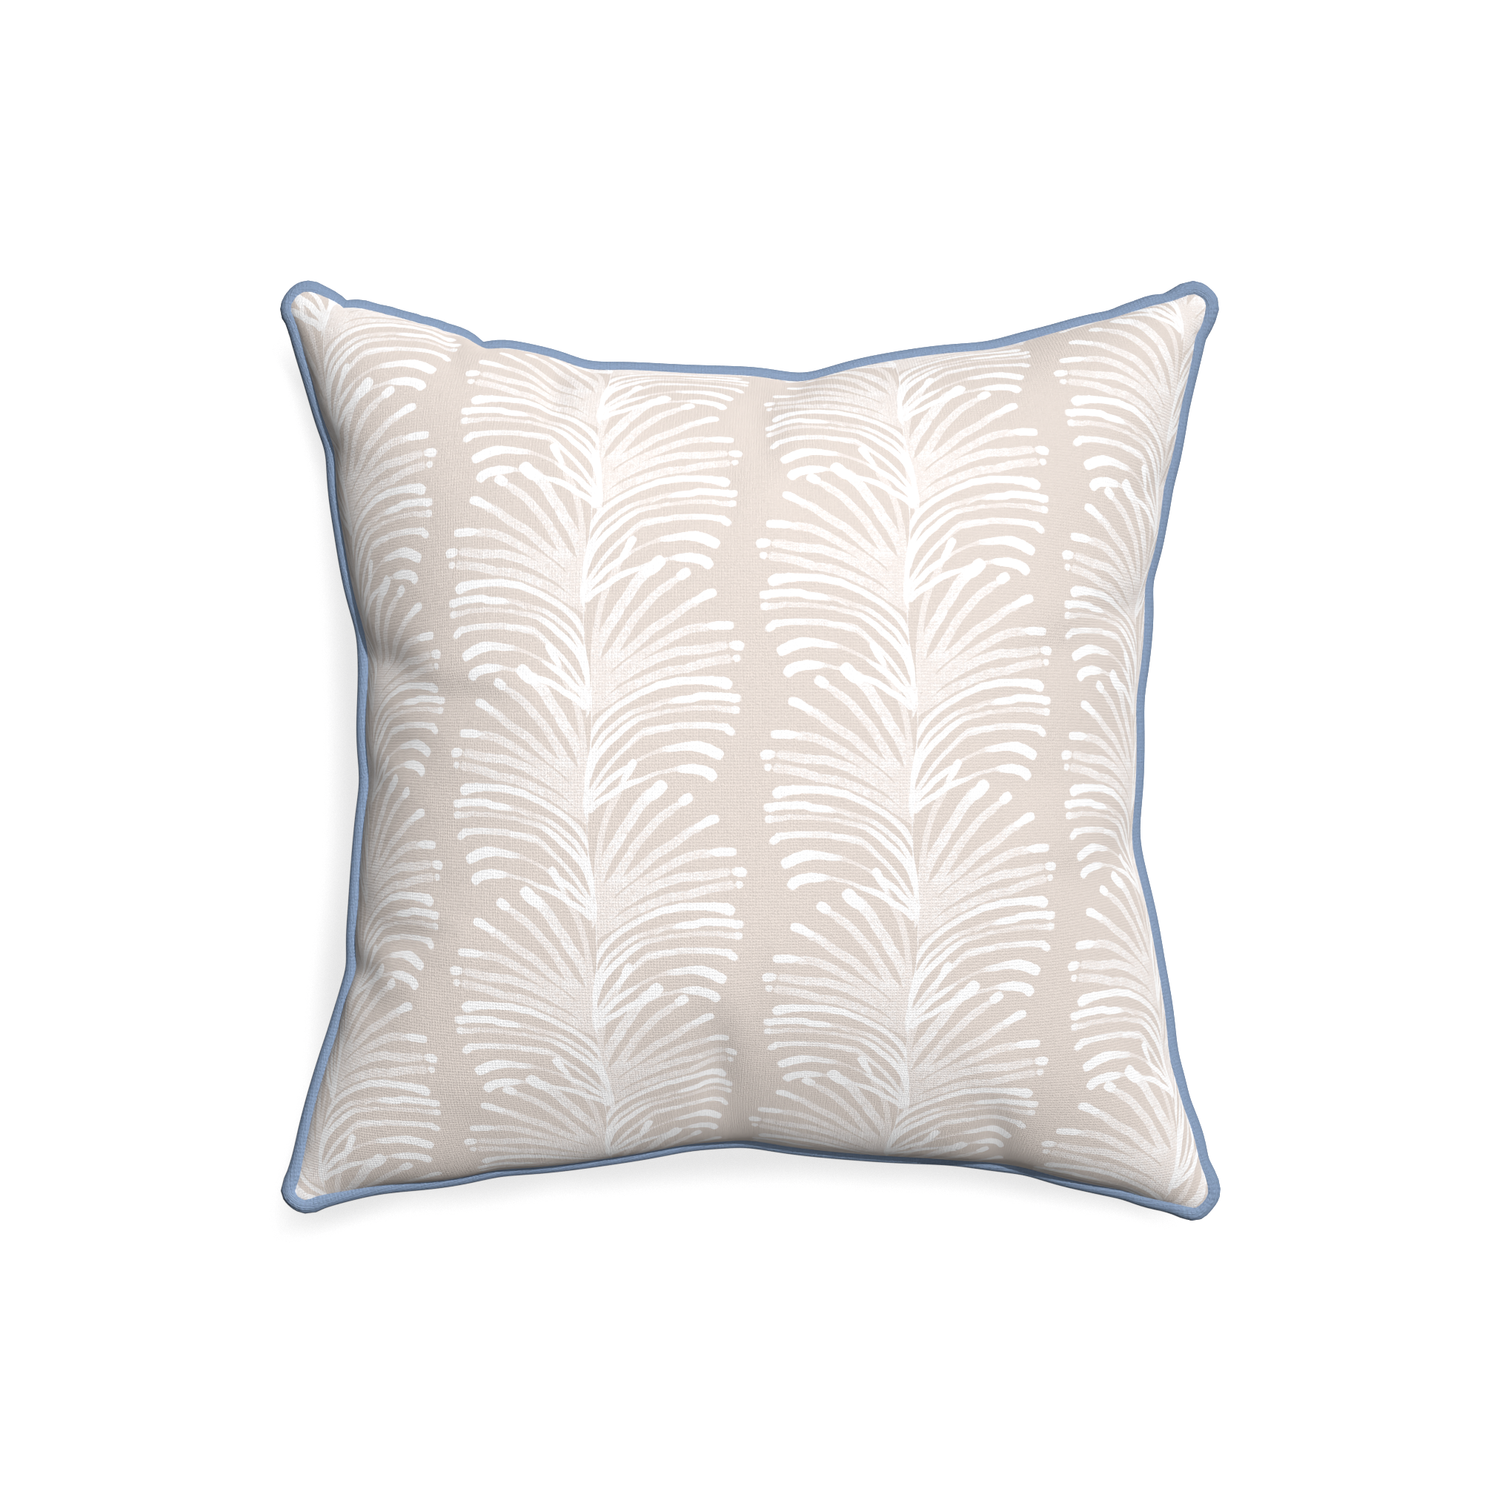 20-square emma sand custom pillow with sky piping on white background